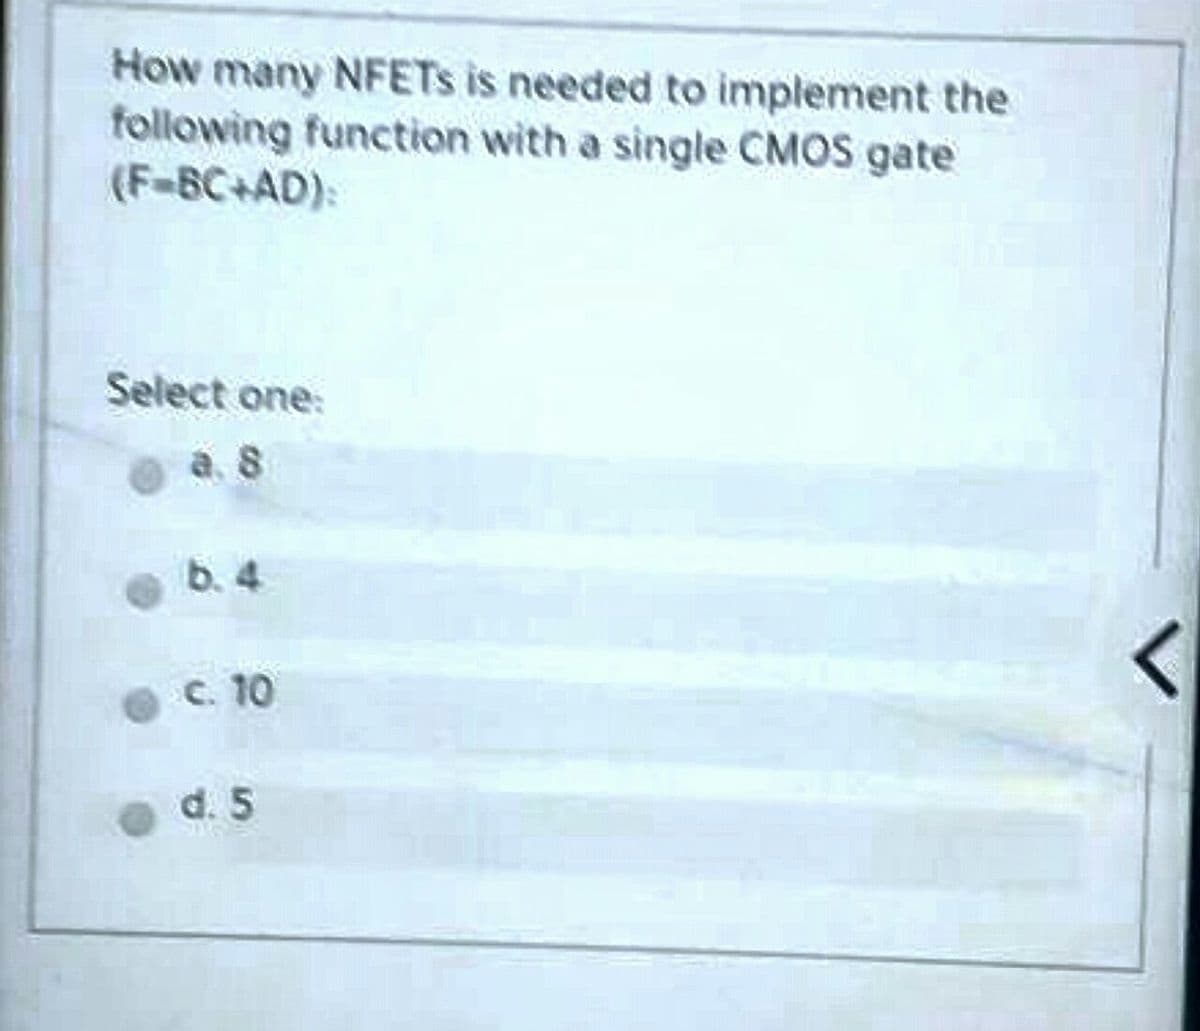 How many NFETS is needed to implement the
following function with a single CMOS gate
(F-BC+AD):
Select one:
a. 8
b. 4
c. 10
d. 5
